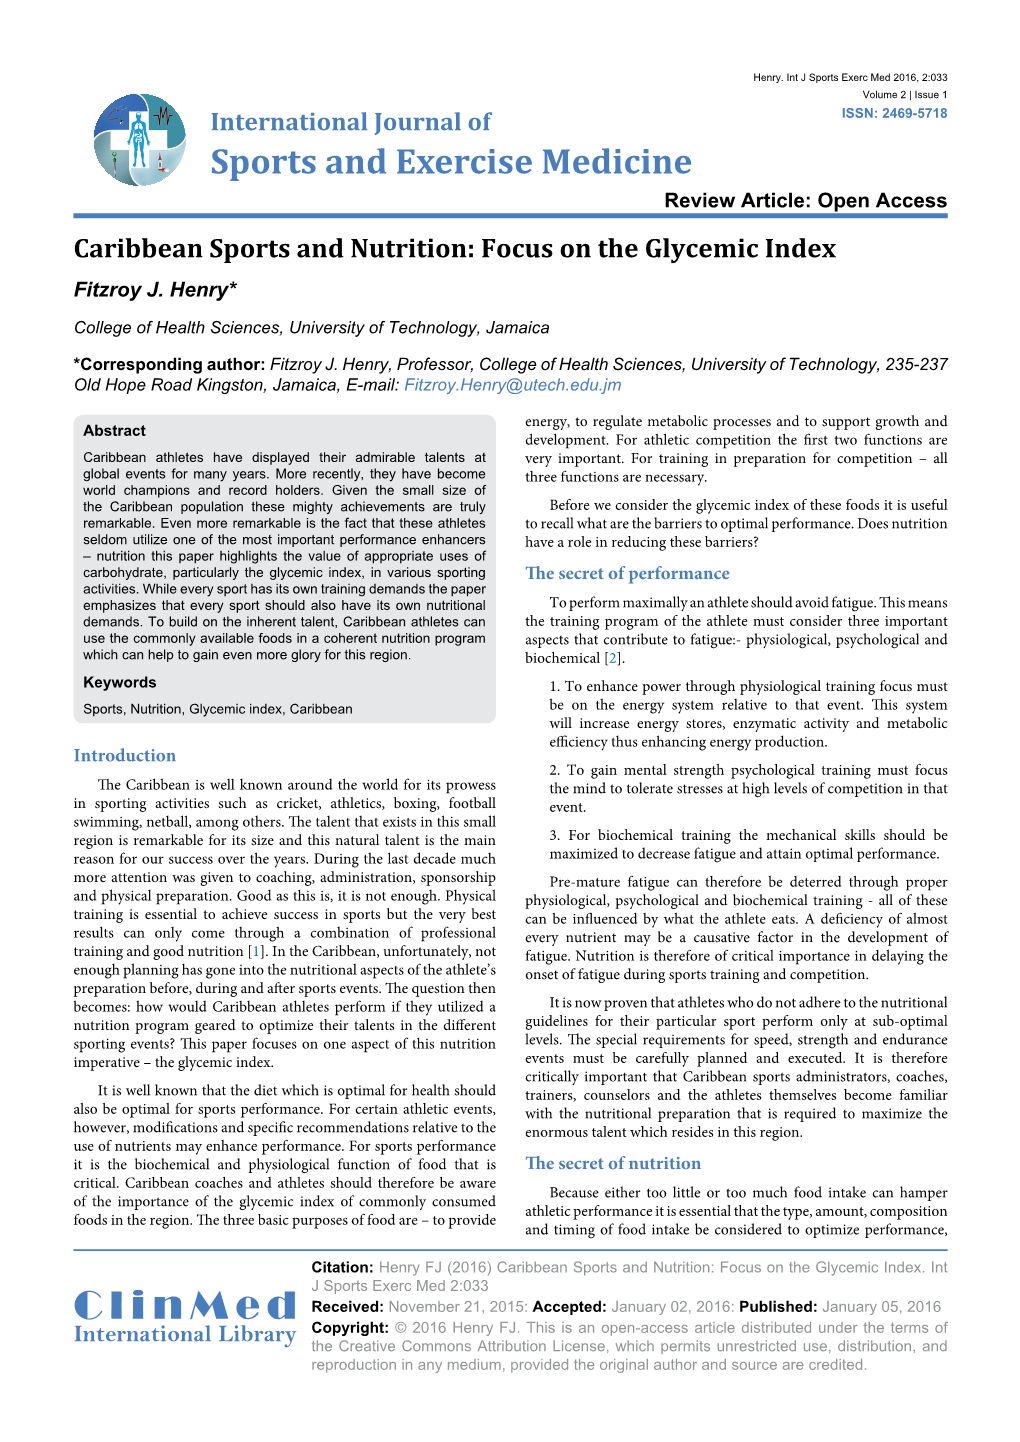 Caribbean Sports and Nutrition: Focus on the Glycemic Index Fitzroy J